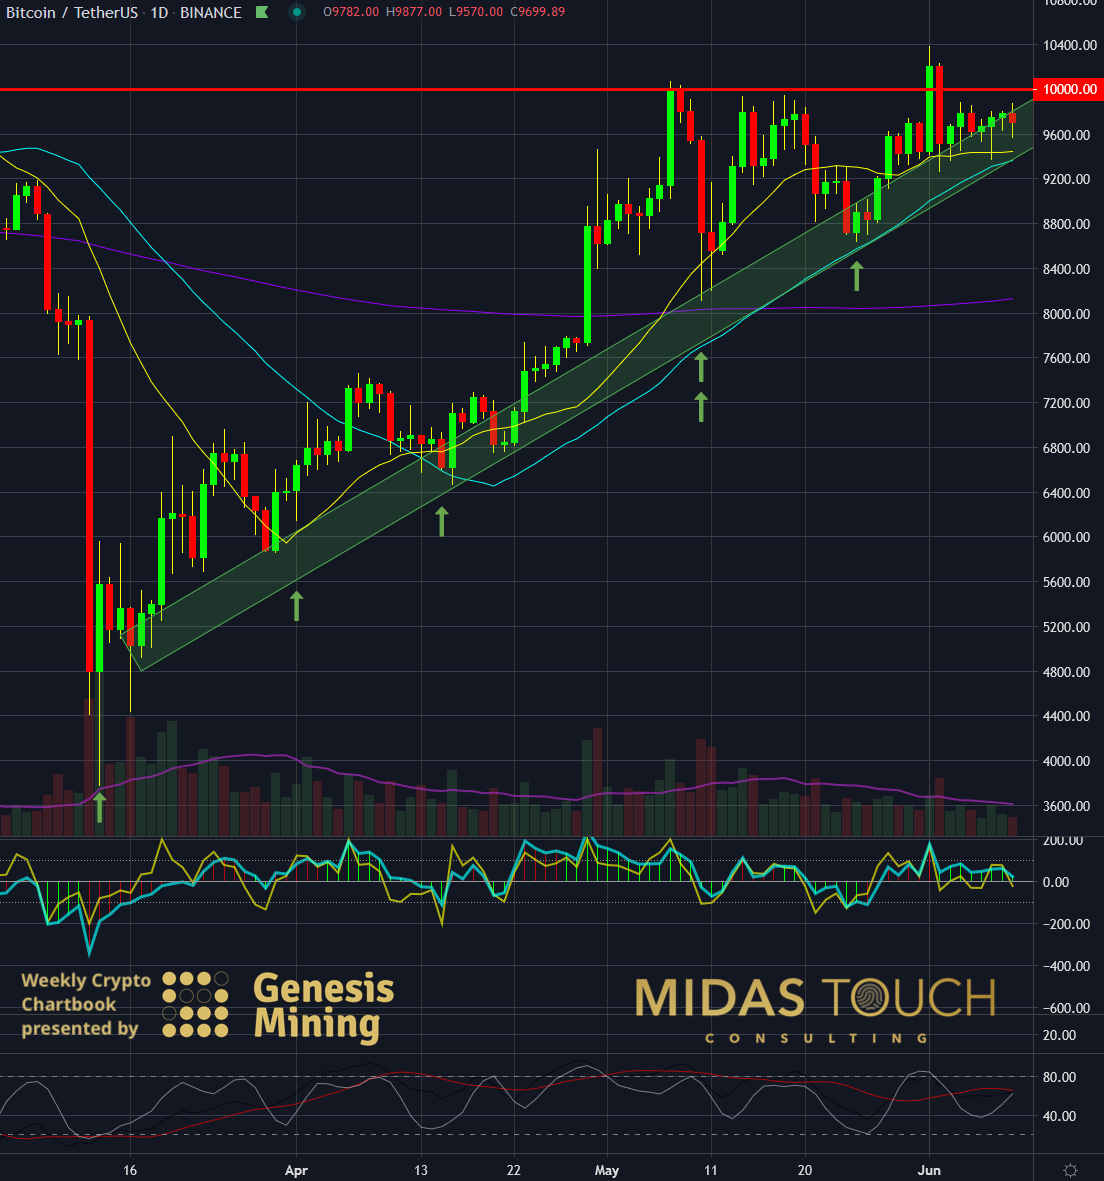 BTC-USDT, daily chart as of June 9th, 2020